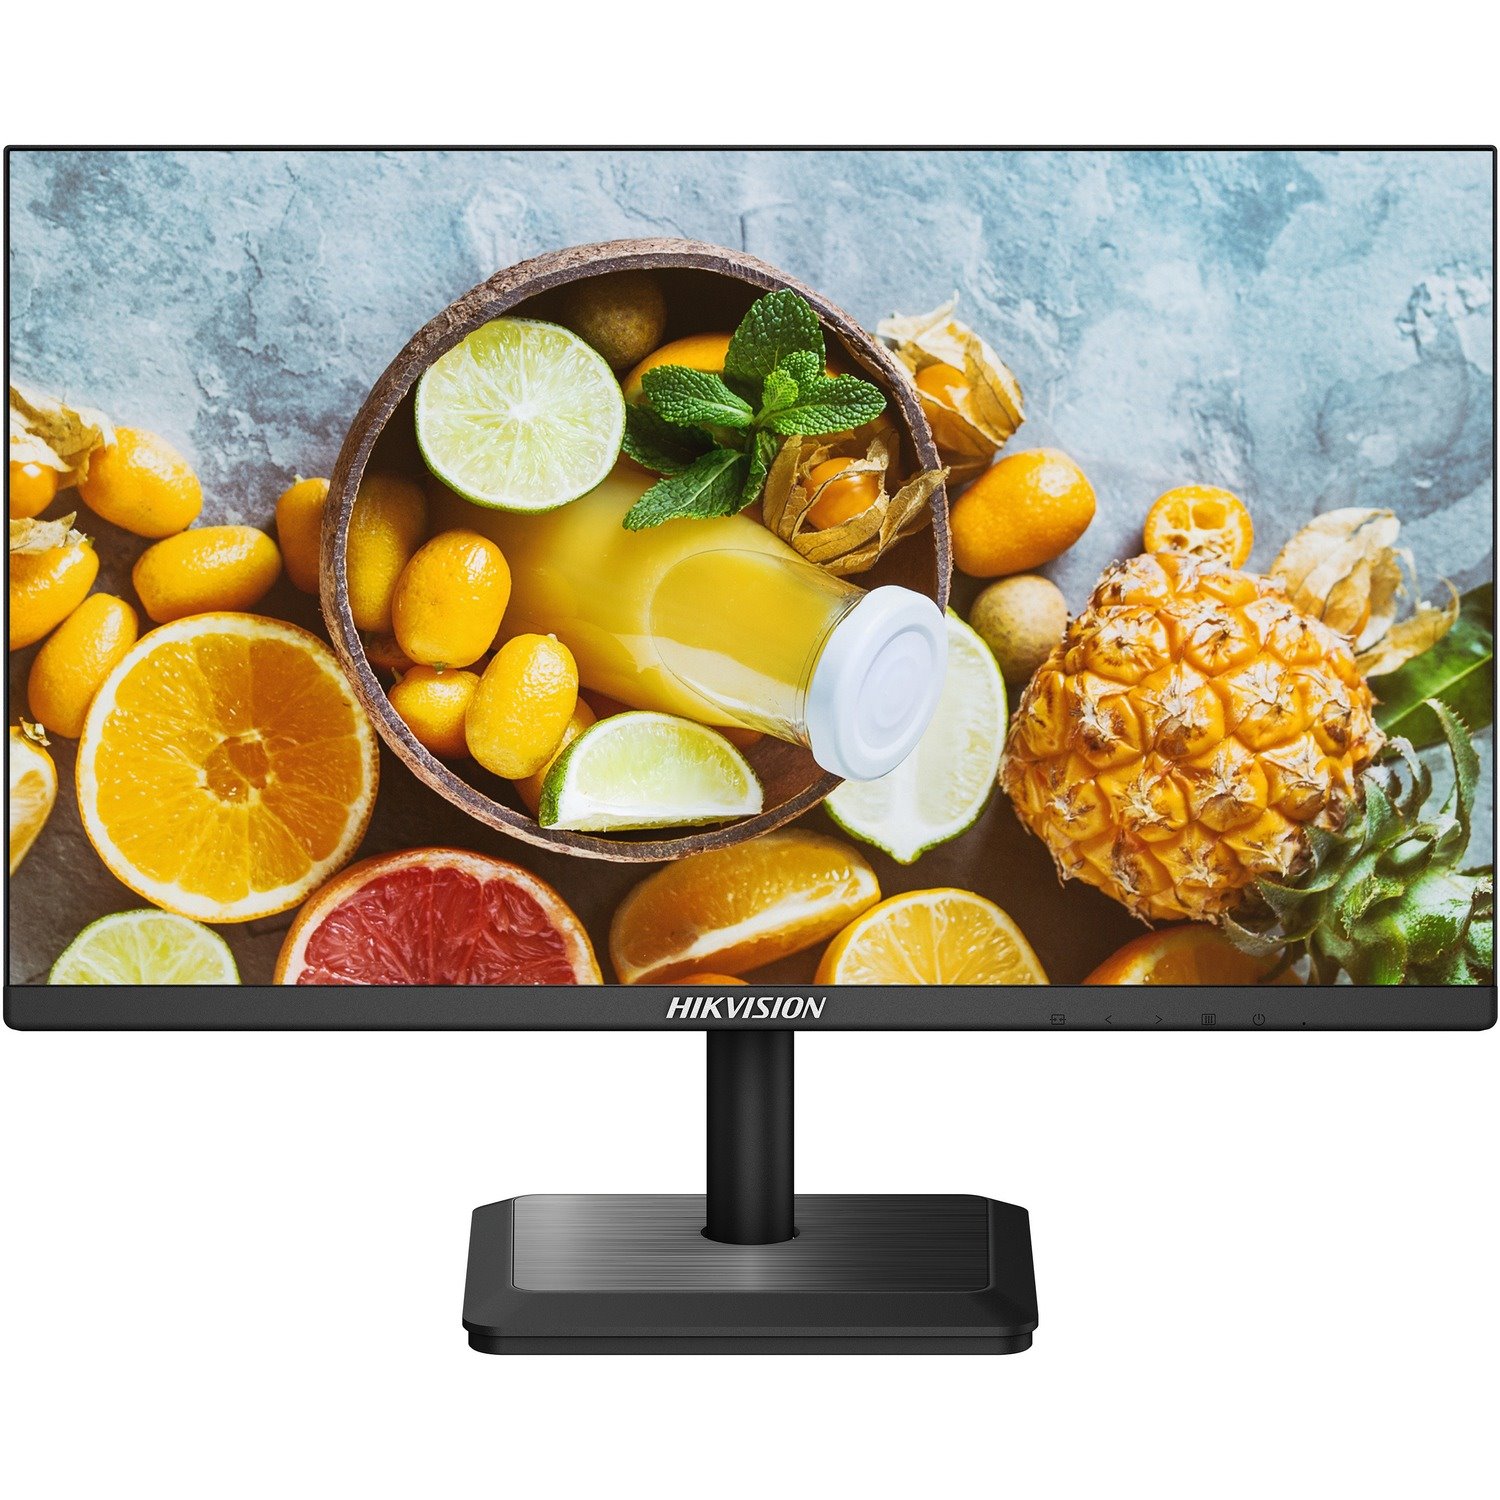 Hikvision DS-D5024FC-C 24" Class Full HD LCD Monitor